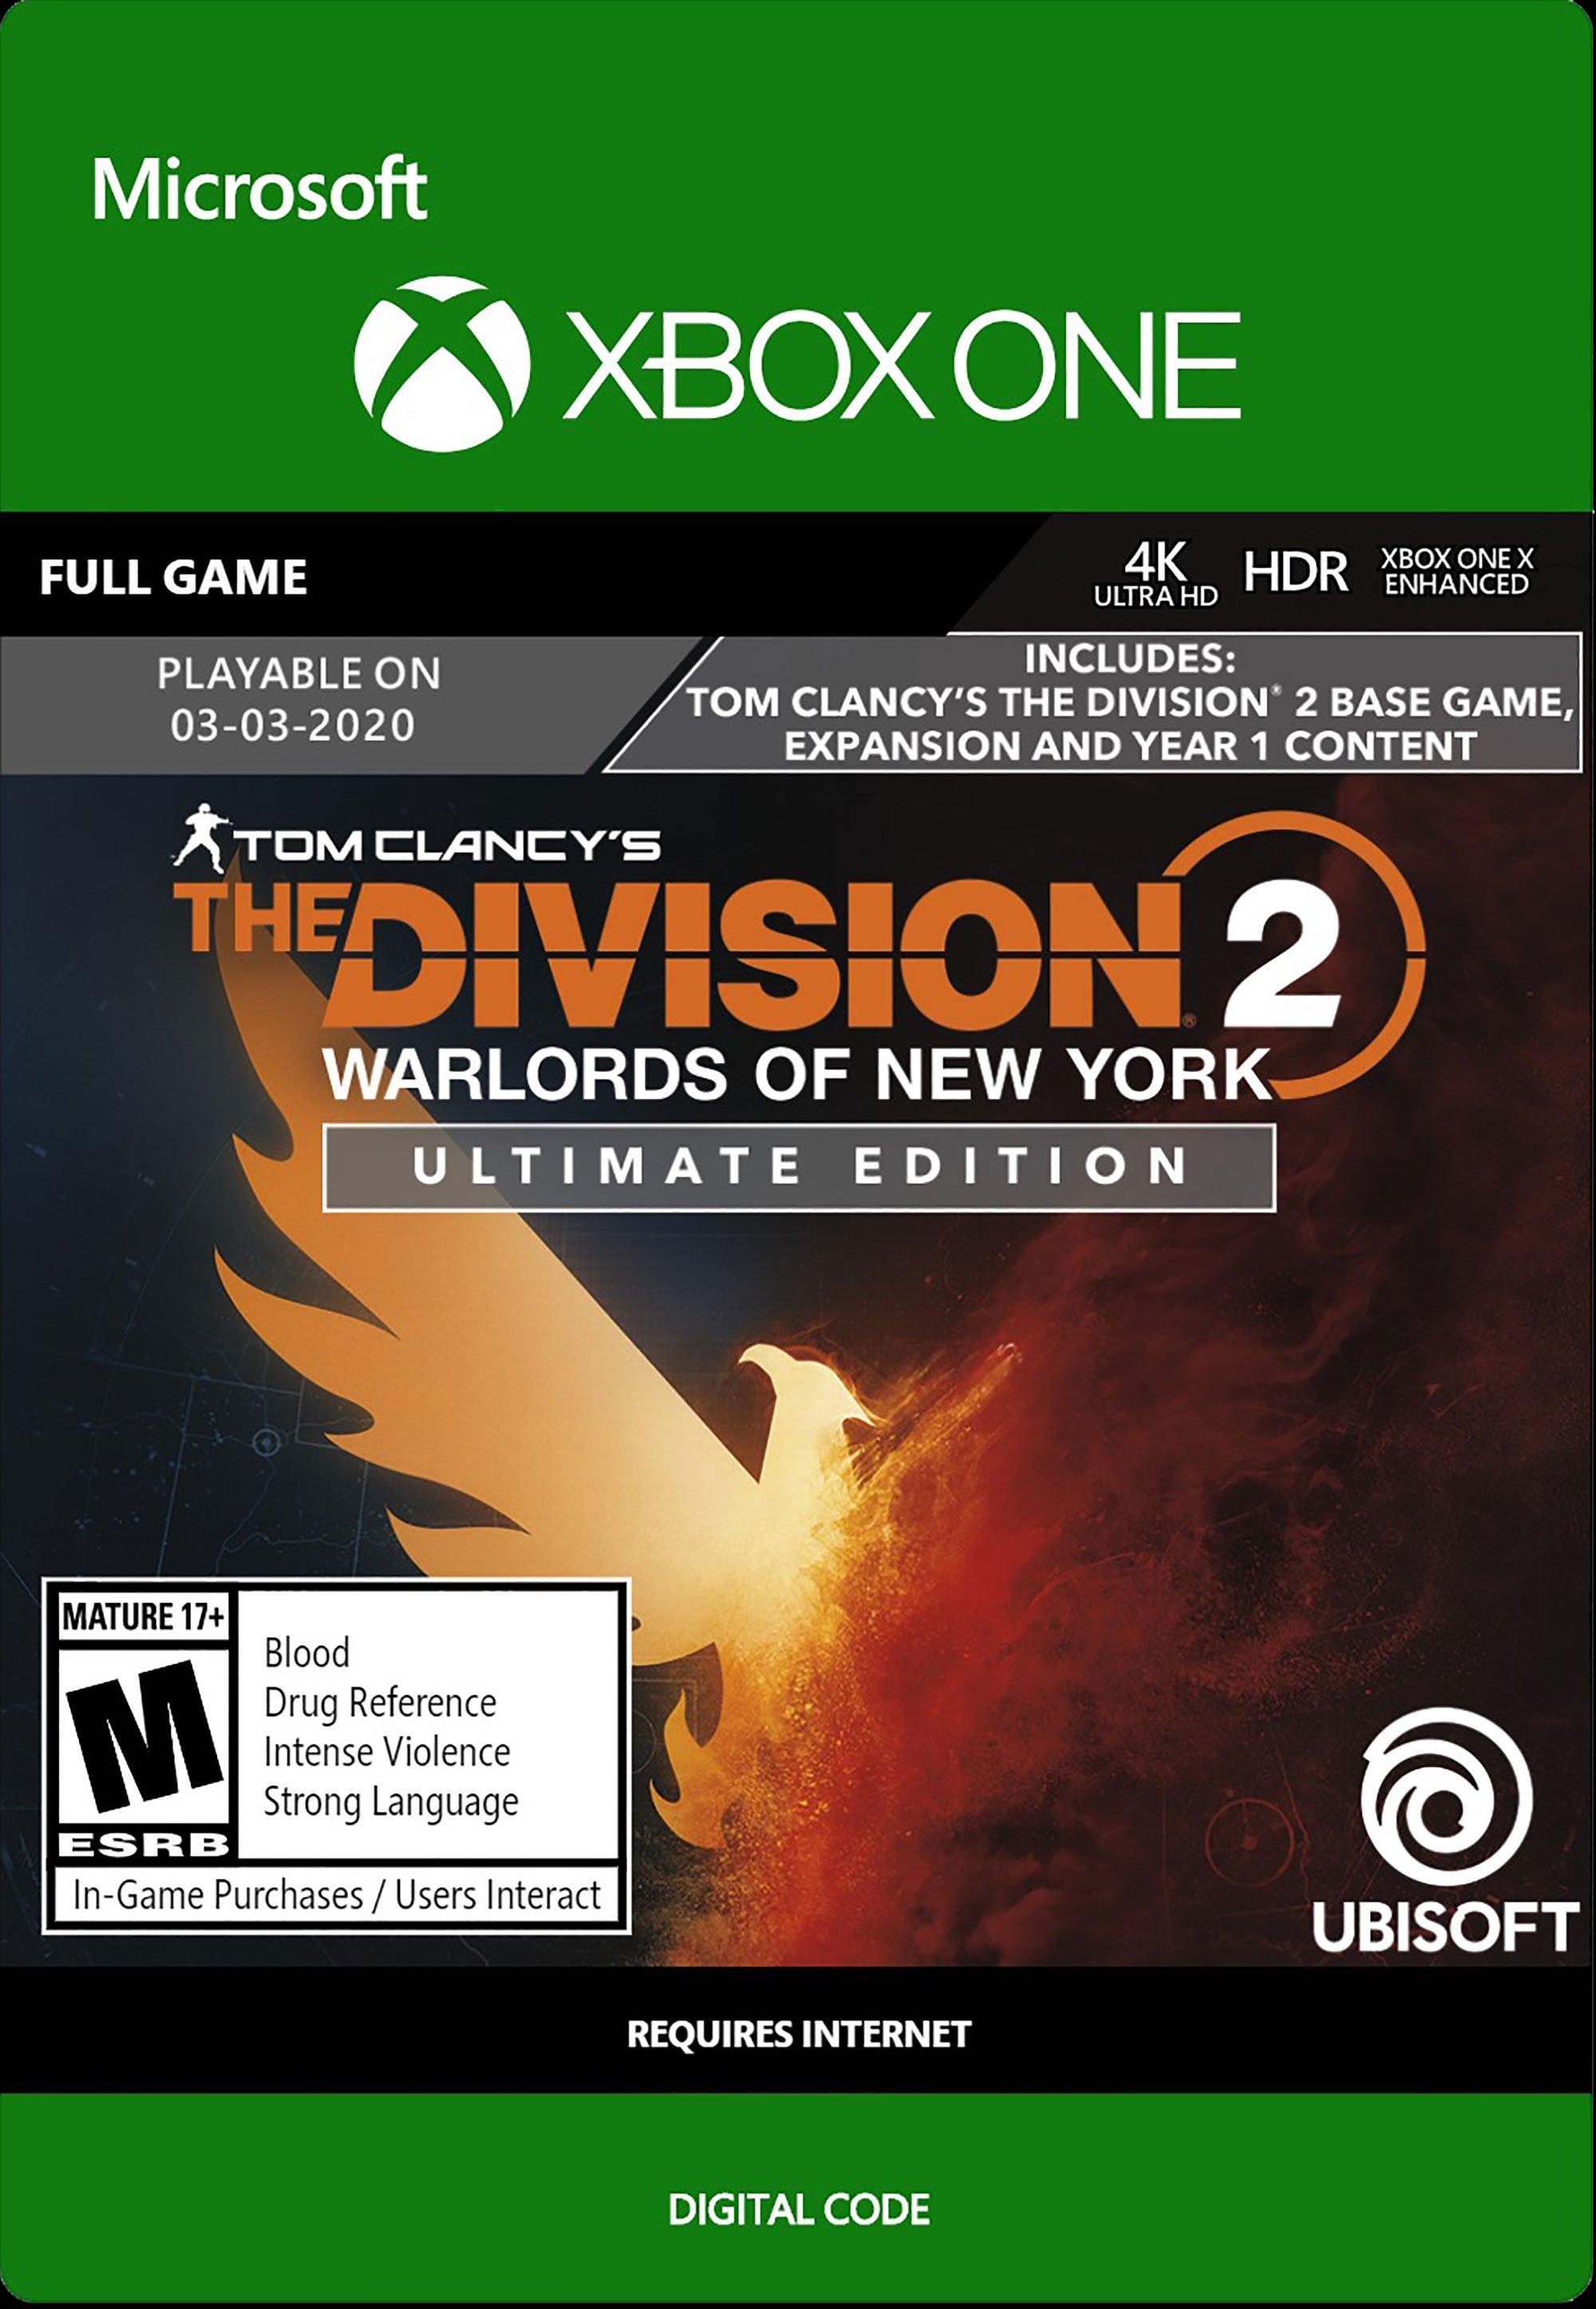 Tom Clancy's The Division (Microsoft Xbox One/Series X)